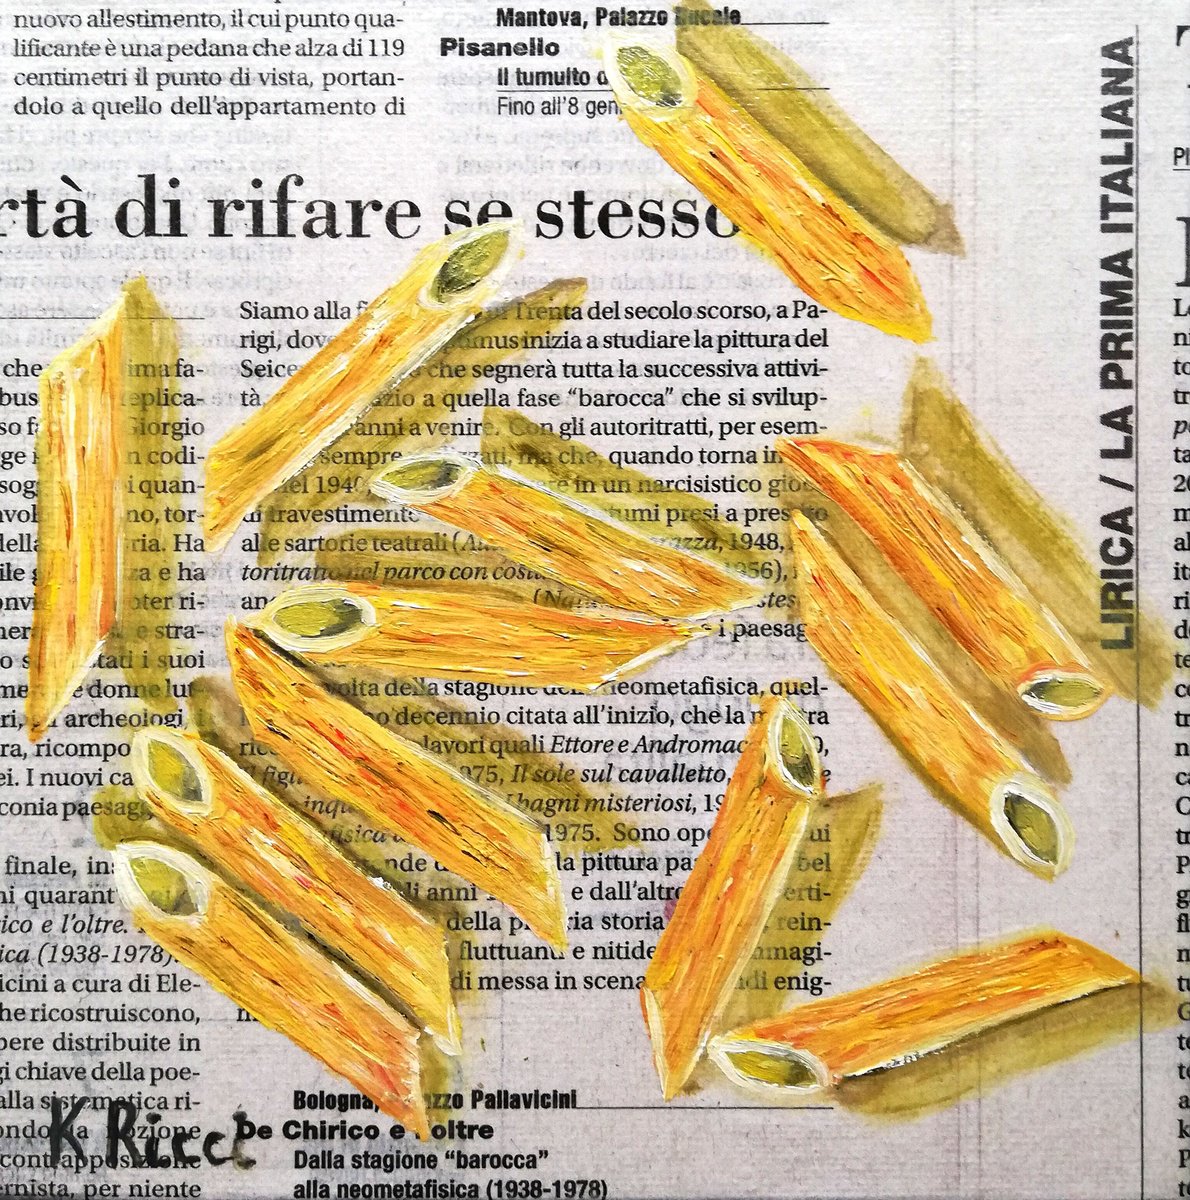 Penne Noodle on Newspaper Original Oil on Canvas Board Painting 6 by 6 inches (15x15 cm) by Katia Ricci